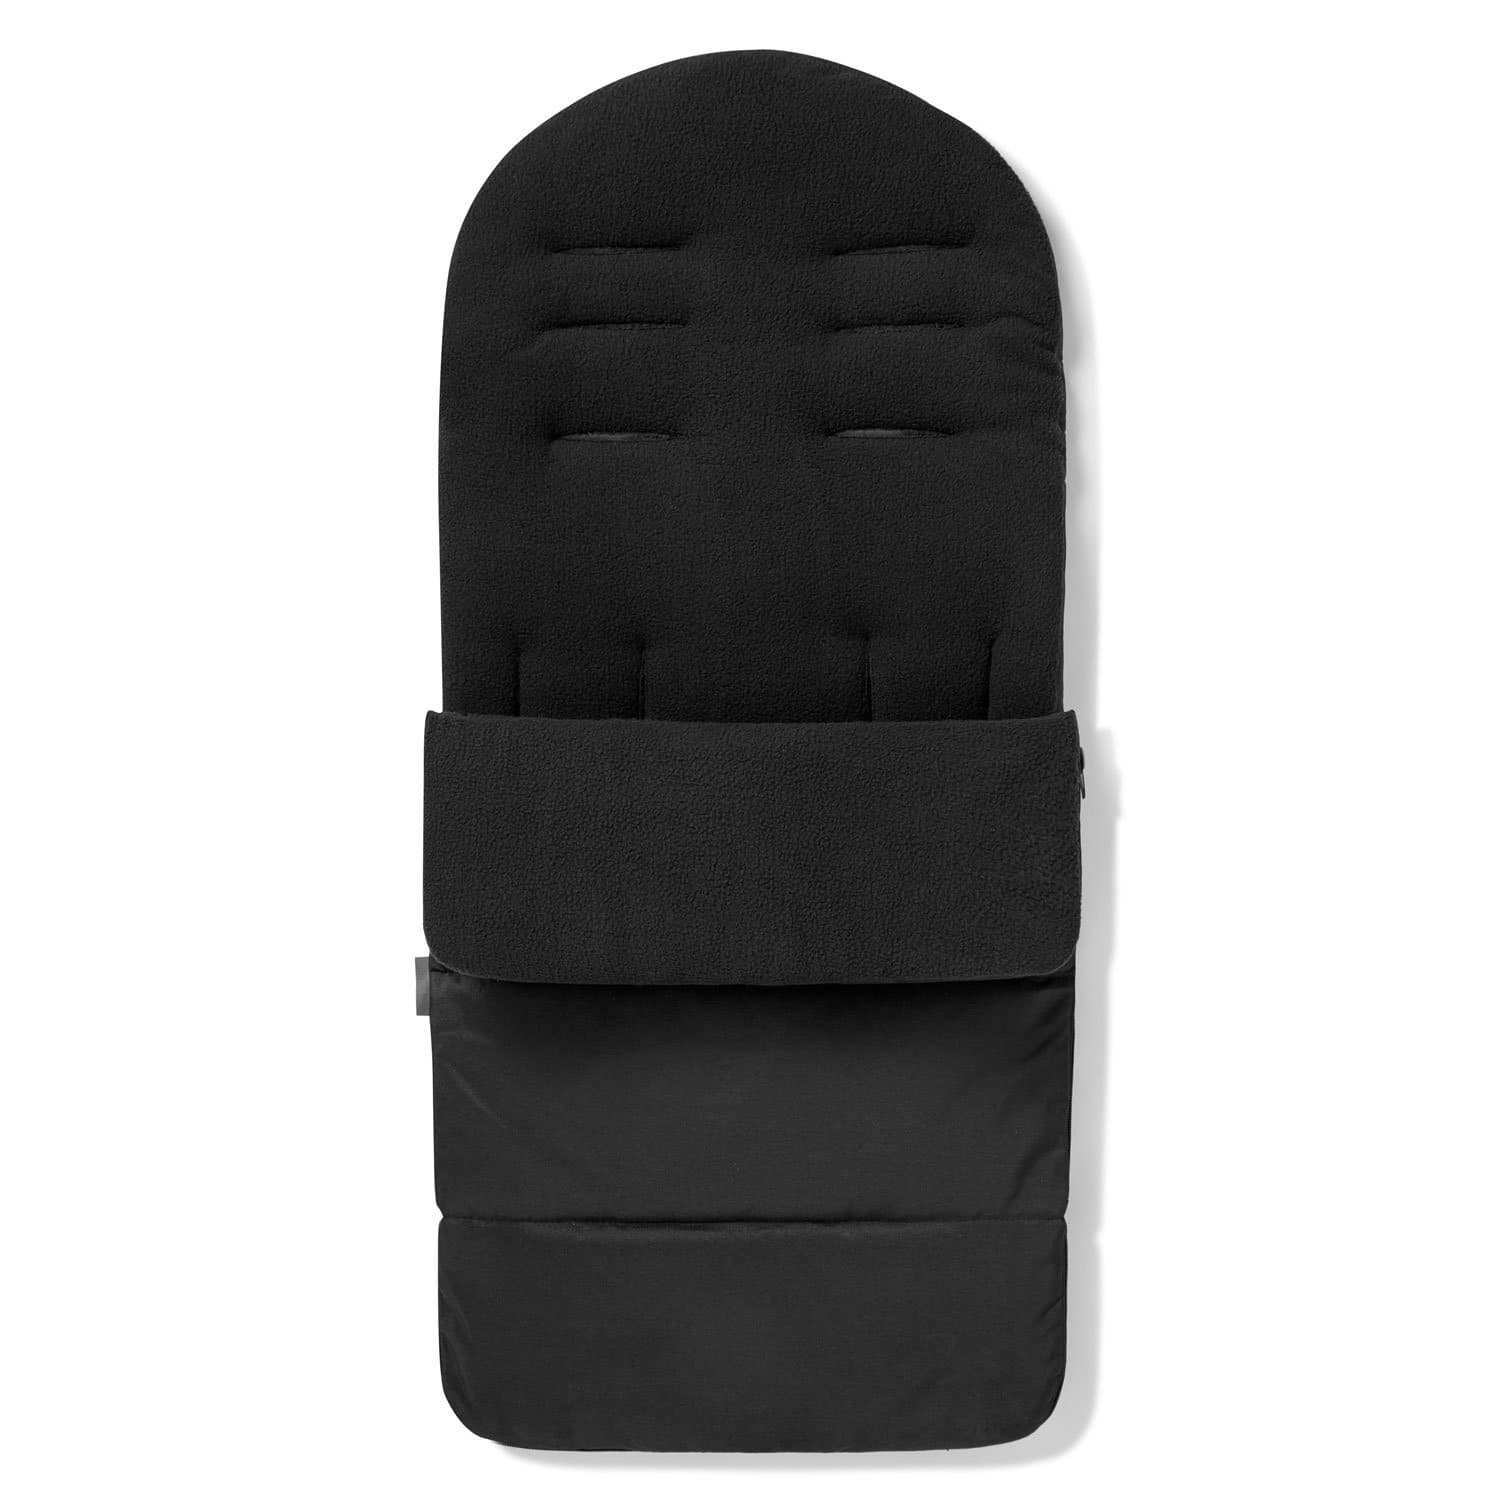 Premium Footmuff / Cosy Toes Compatible with Little Shield - Black Jack / Fits All Models | For Your Little One